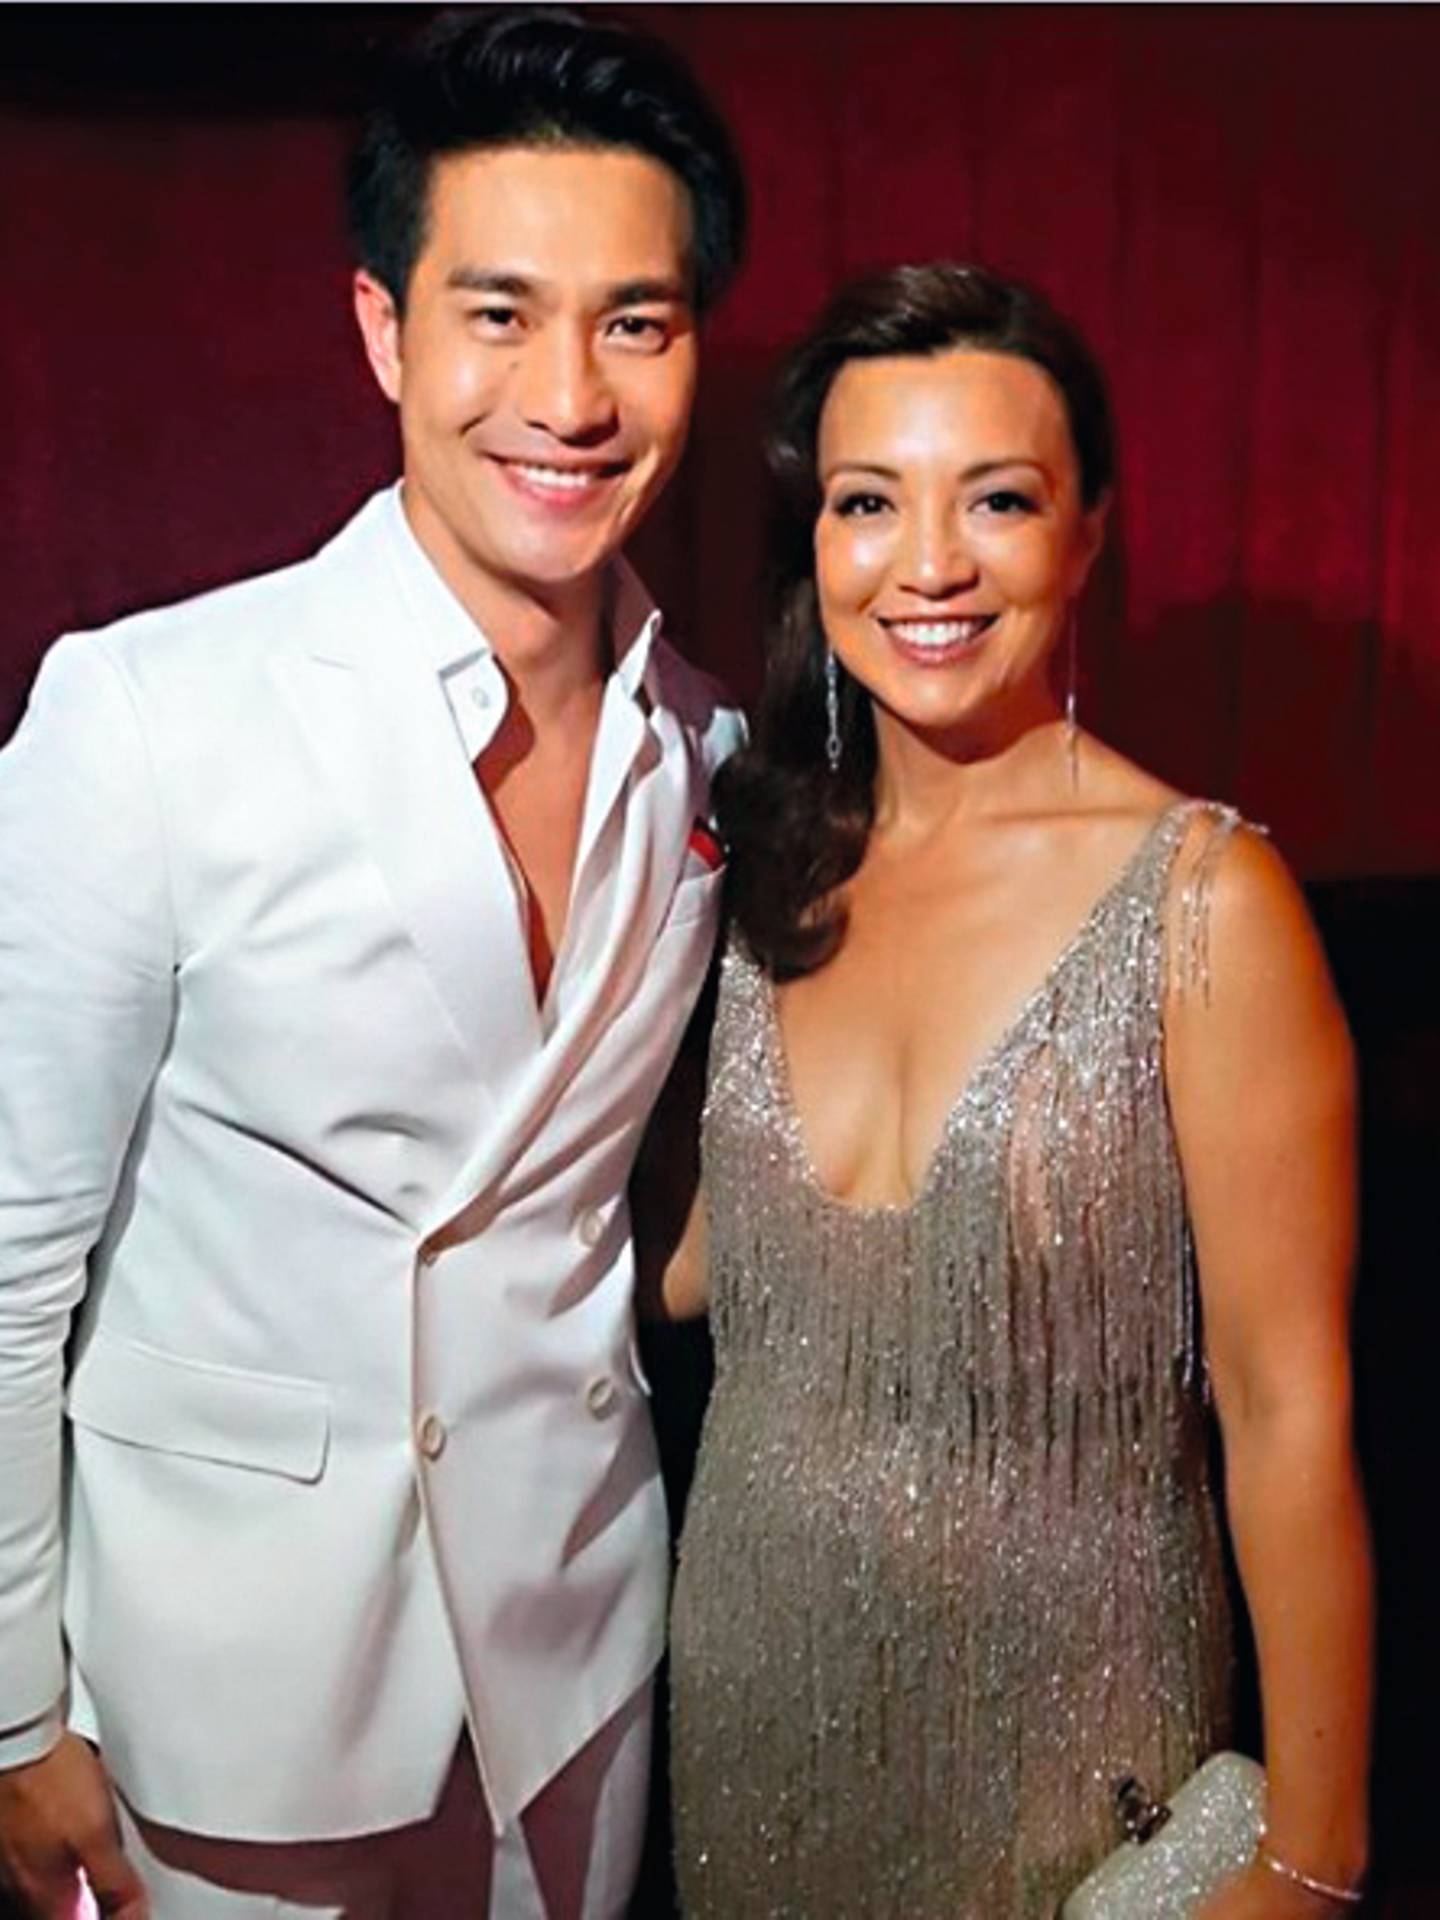 Pierre Png On How Nervous He Was On The Crazy Rich Asians.